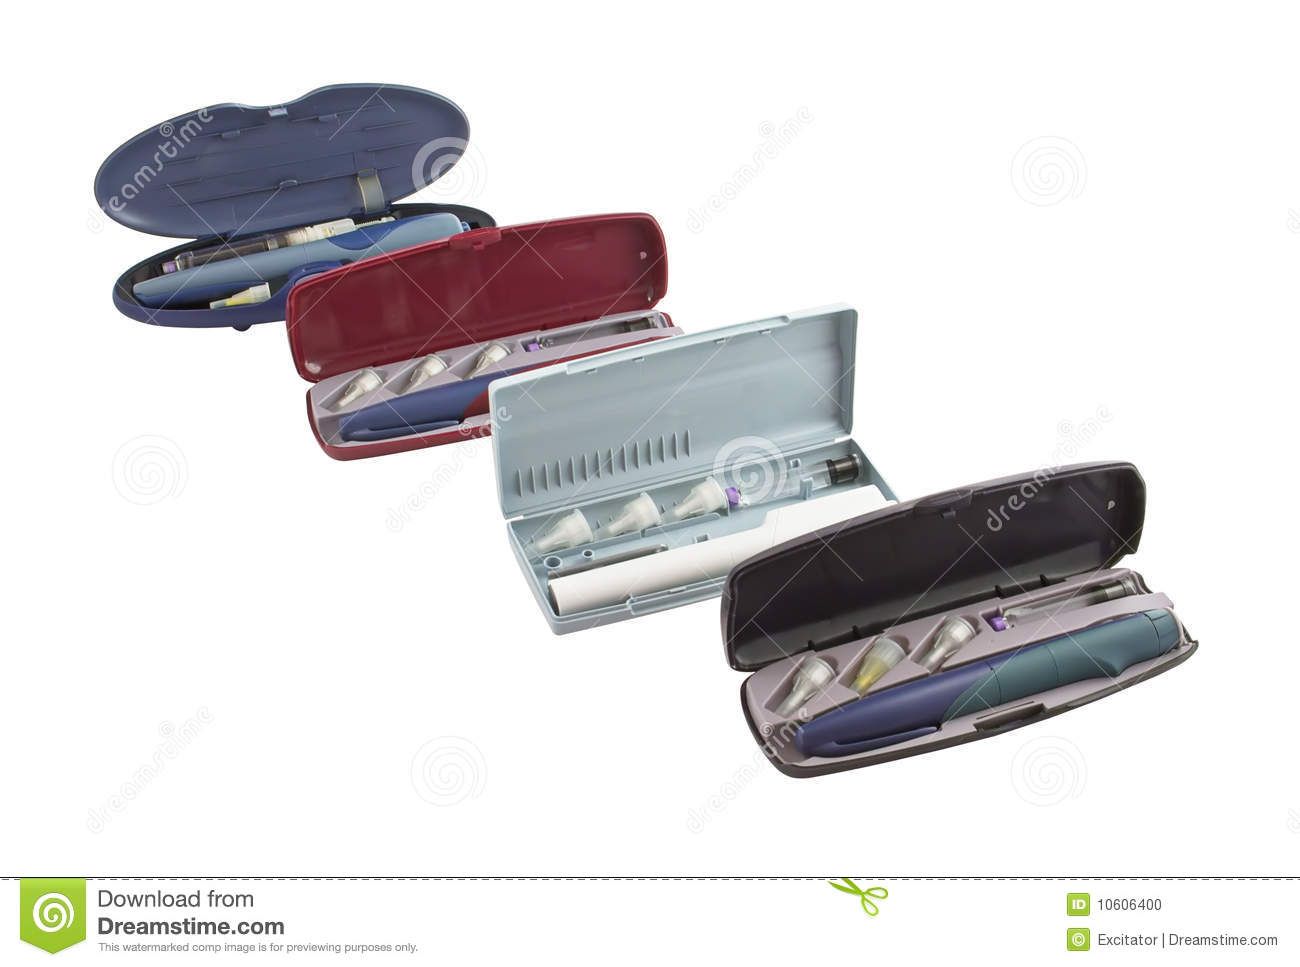 Four Insulin Pens With A Containers And Disposable Needles